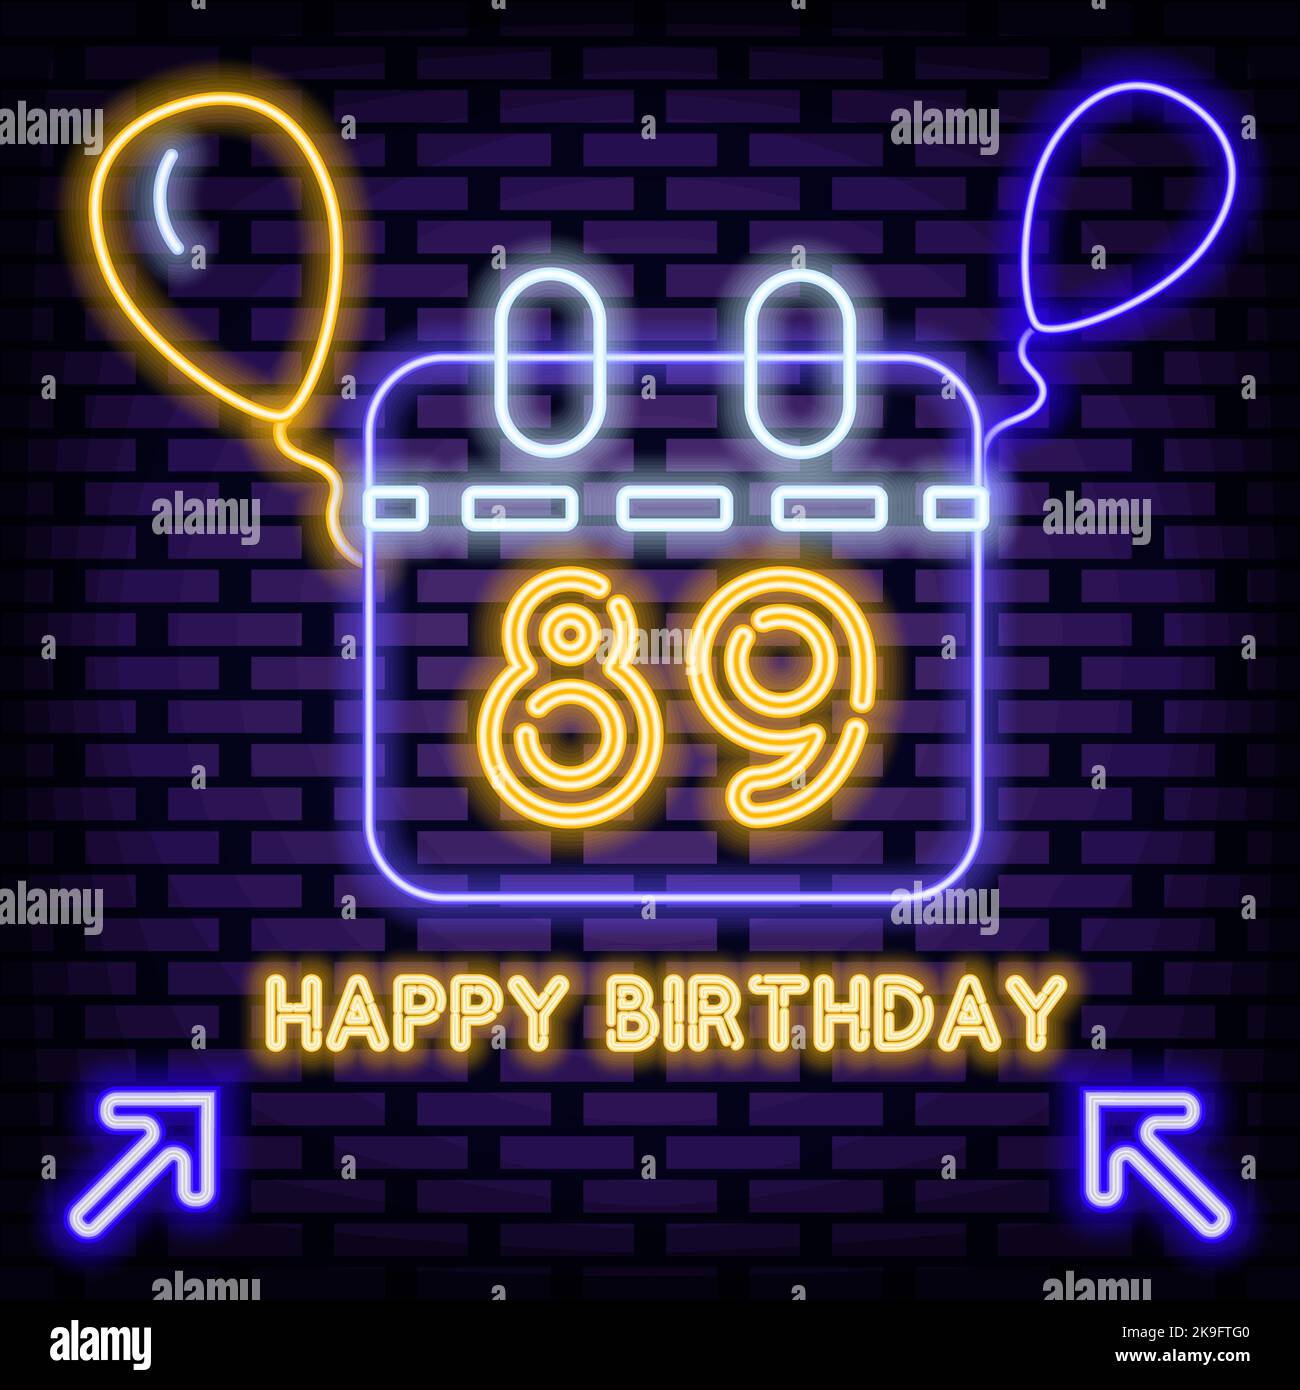 89th Happy Birthday 89 Year old Neon Sign Vector. On brick wall background. Light art. Stock Vector